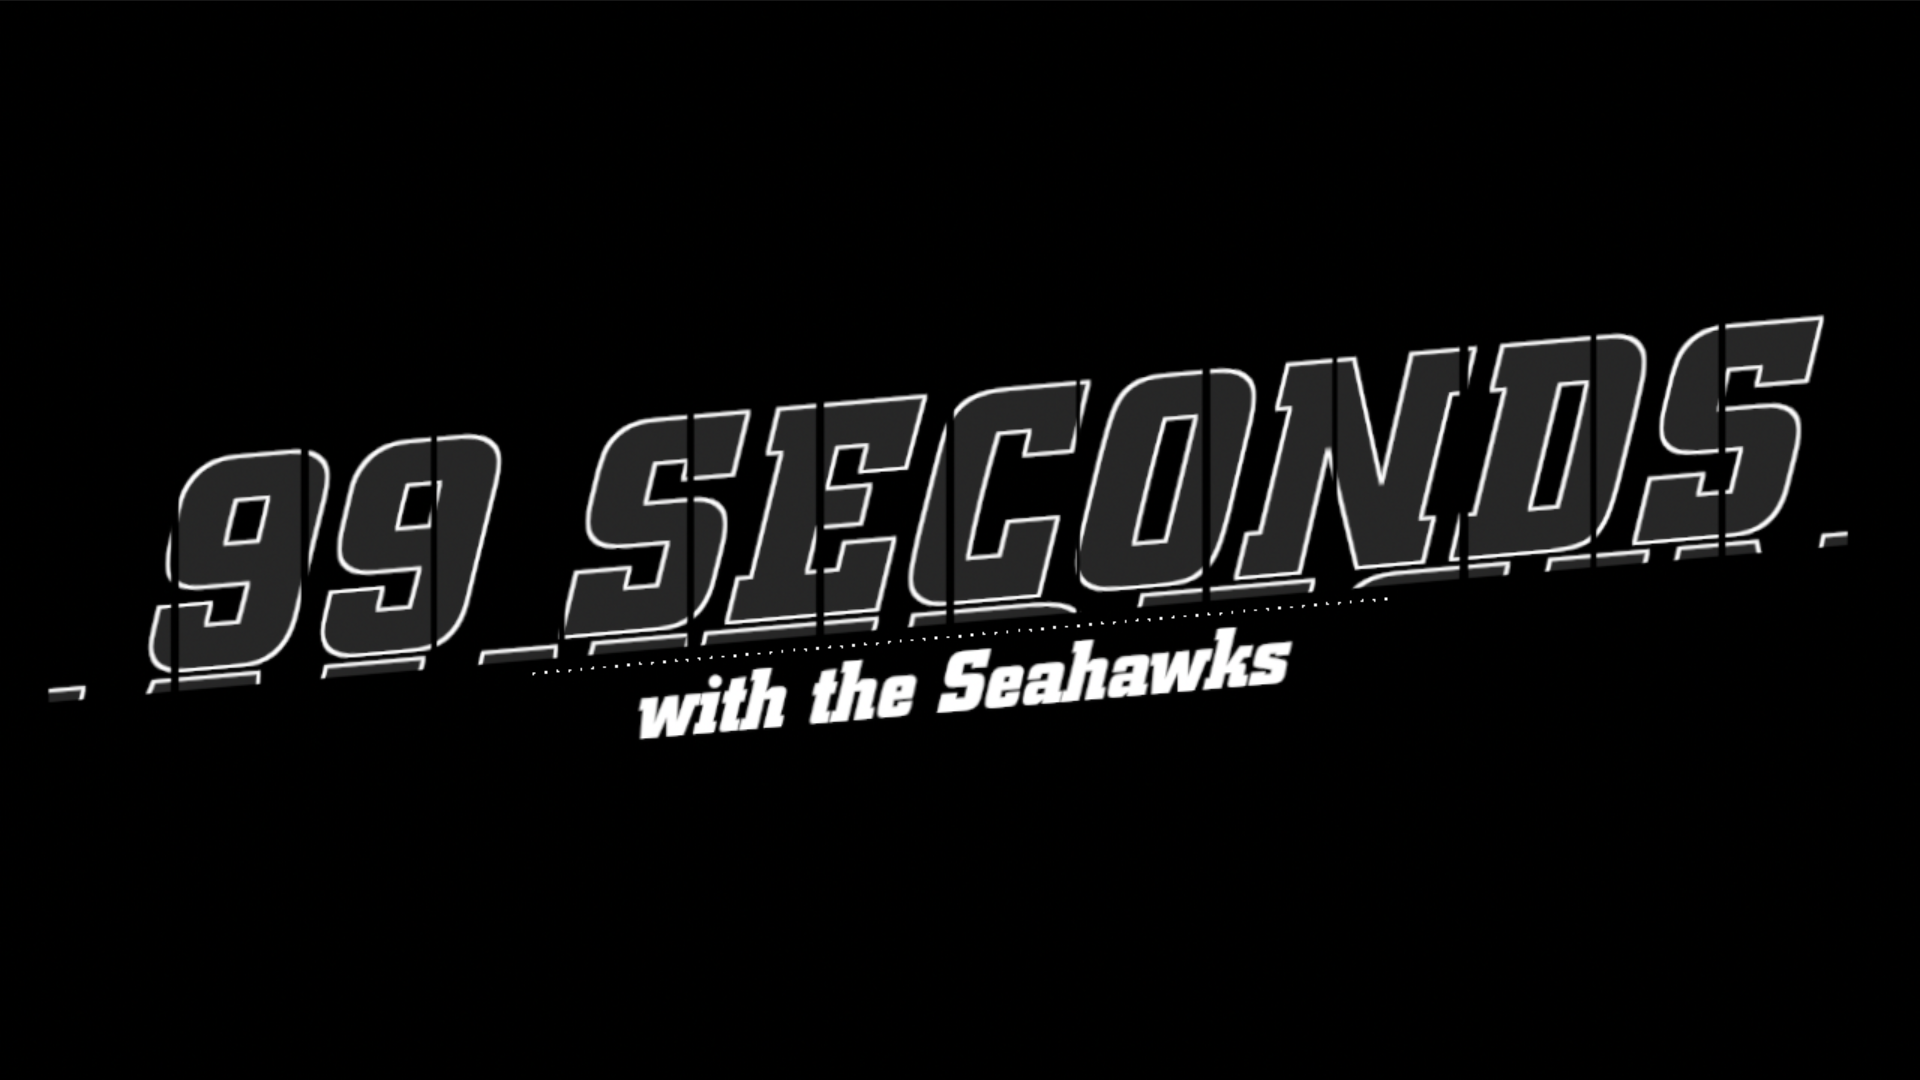 99 Seconds with the Seahawks (click to play video)